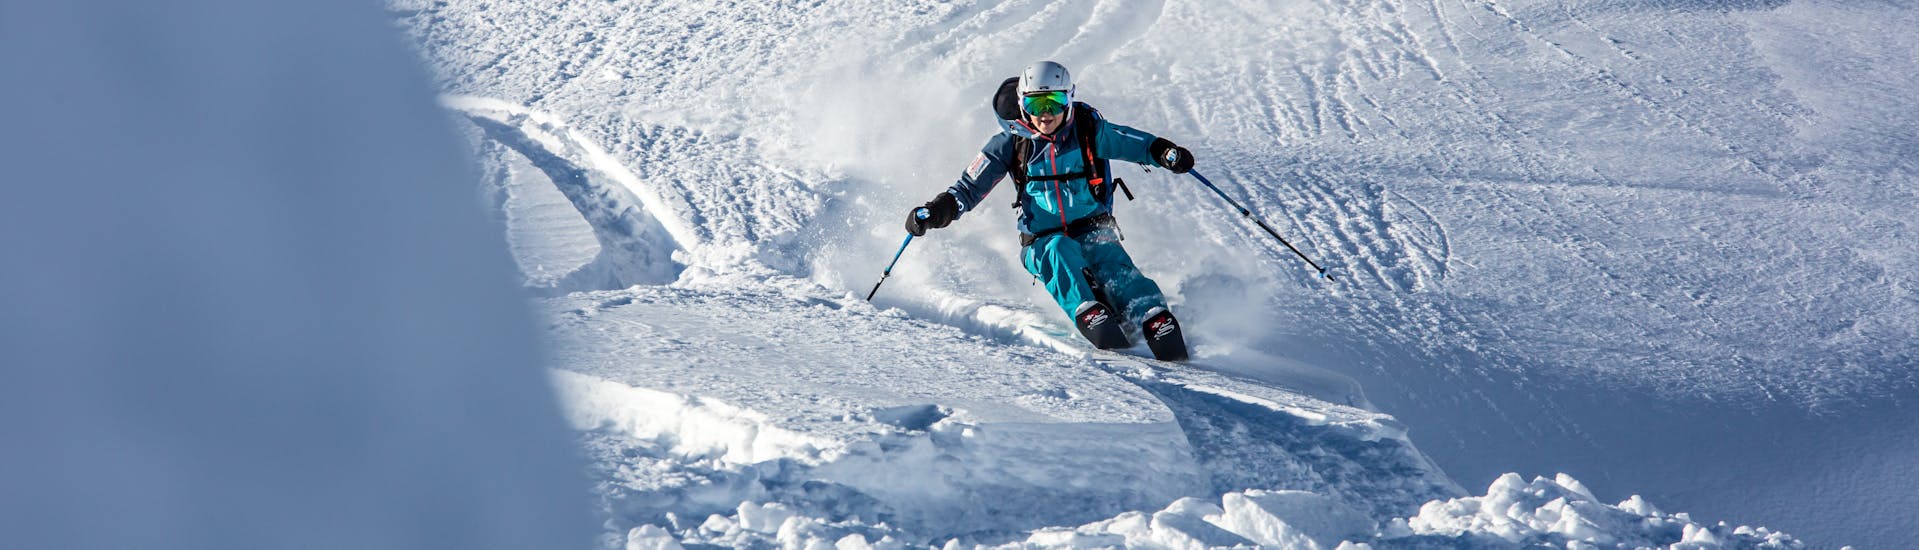 A skier races down off-piste during the Freeriding Basic course.